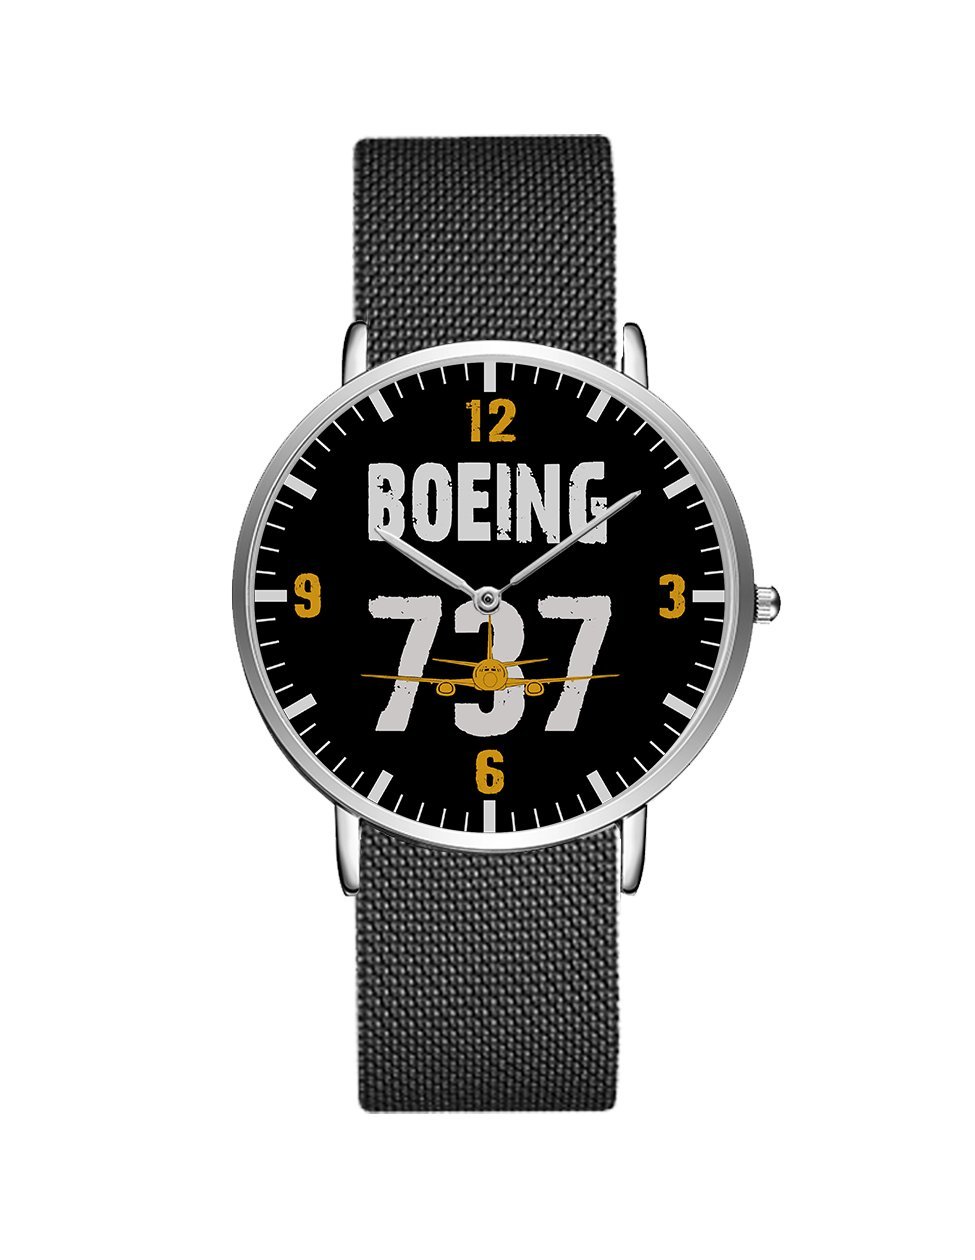 Boeing 737 Designed Stainless Steel Strap Watches Pilot Eyes Store Silver & Black Stainless Steel Strap 